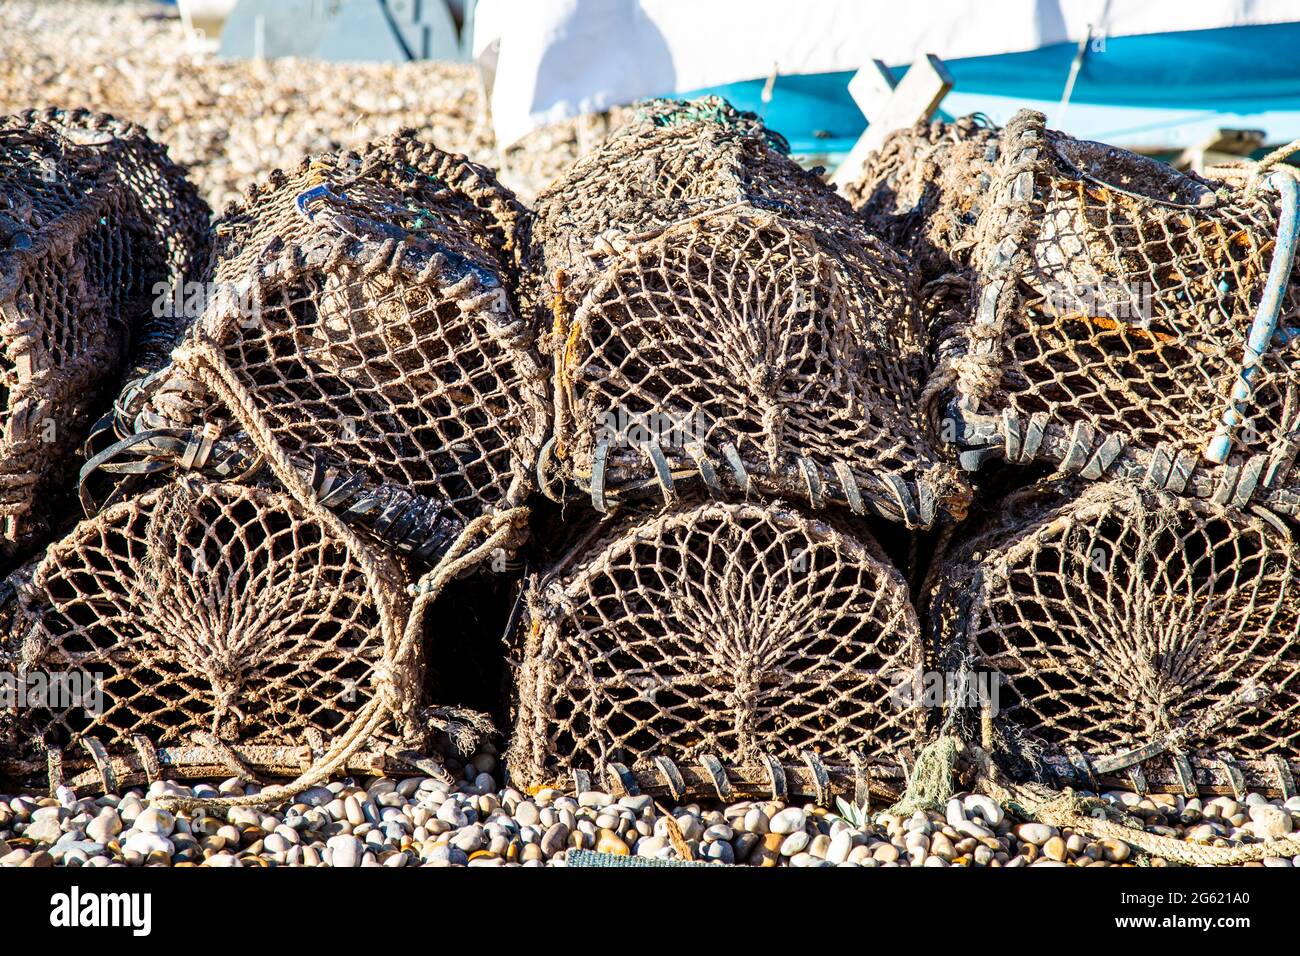 Stacked fishing creels / crab cages on Beer Beach, Jurassic Coast, UK Stock Photo